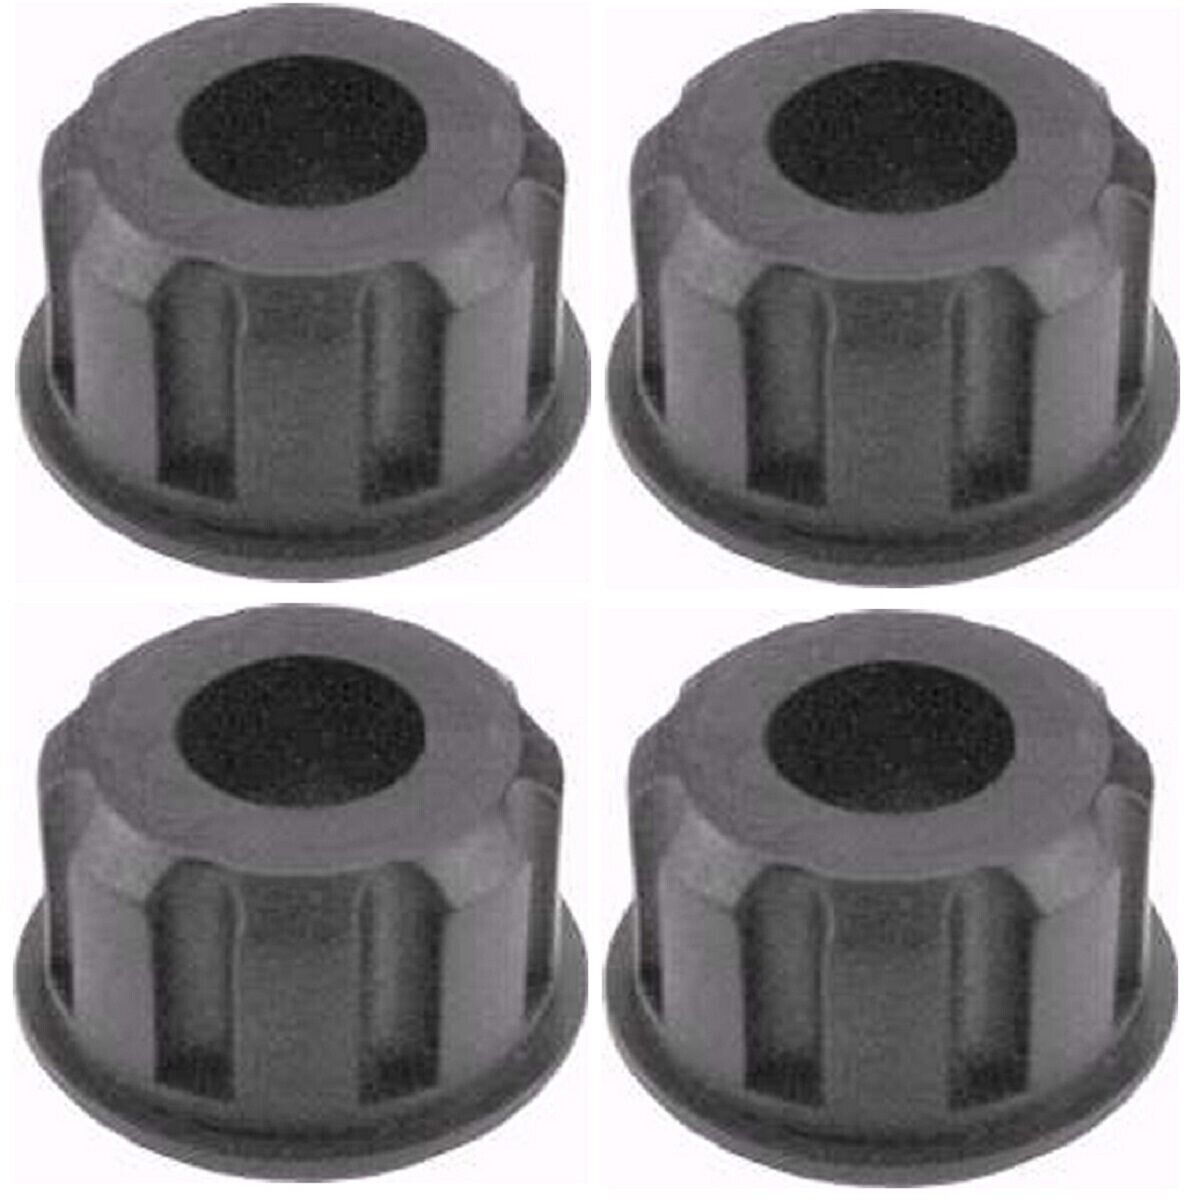 Primary image for 4pk Flanged Wheel Bushings for Murray 56105 5/8 X 1-3/8 Riders